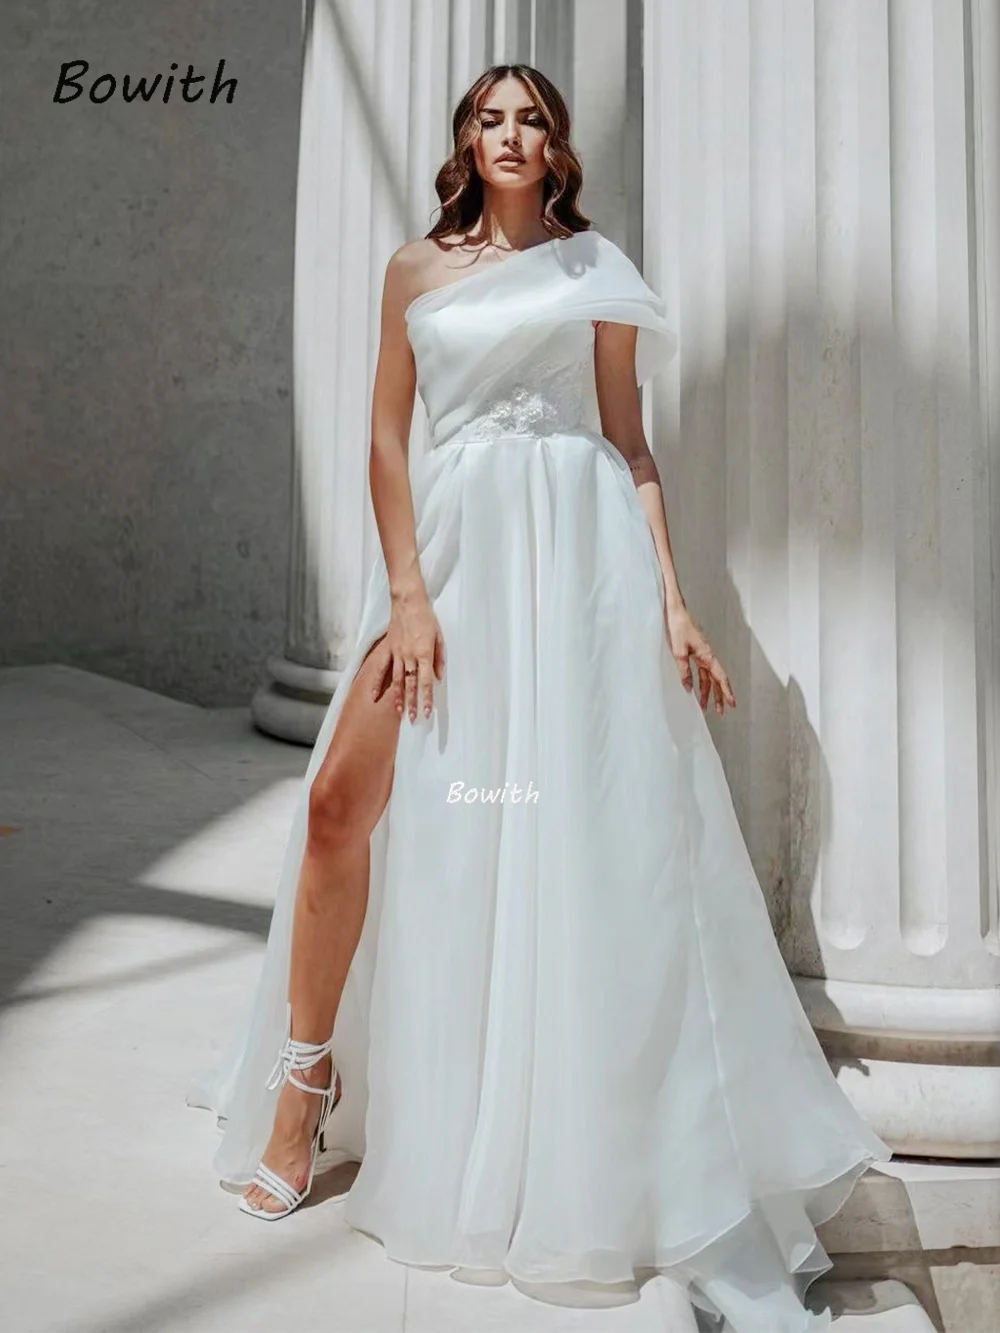 

Bowith Luxury Evening Party Dresses Long Evening Gown Puffy Celebrity Dress Elegant Formal Party Gown Women vestidos de fiesta